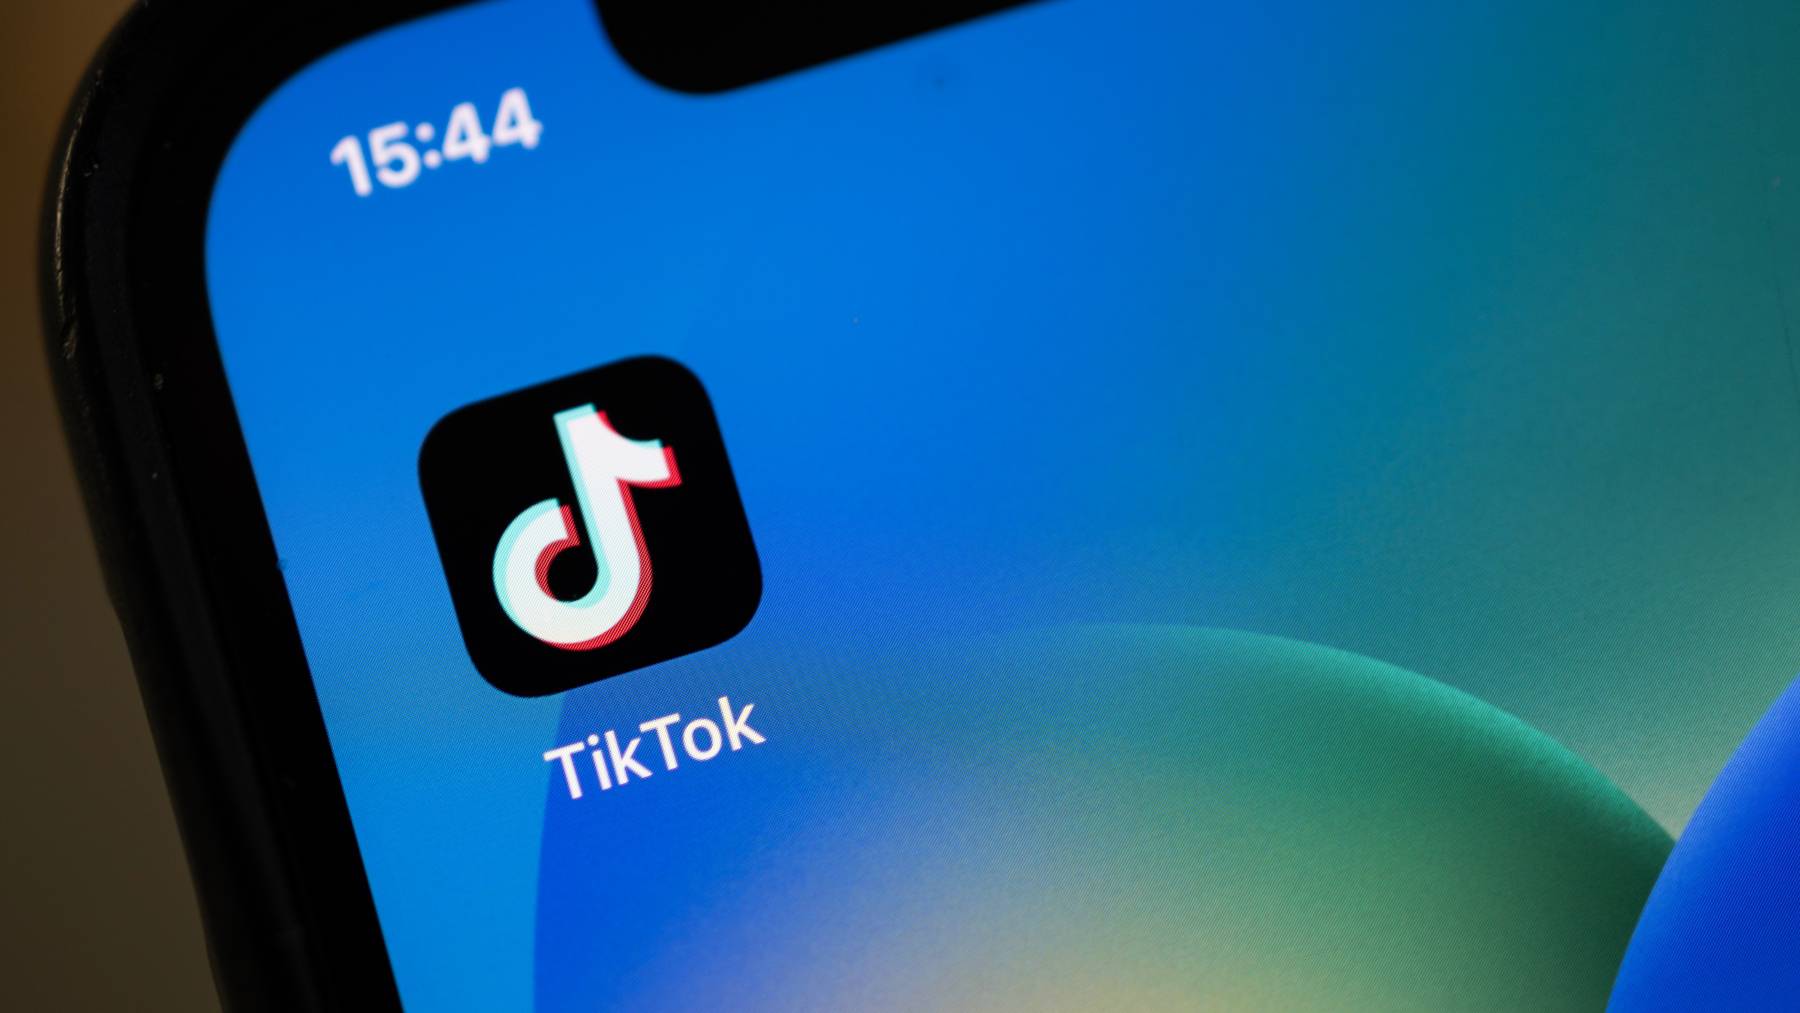 TikTok's future in the US hangs in the balance as it faces renewed calls for a ban on the platform if it doesn't sell to an American company.